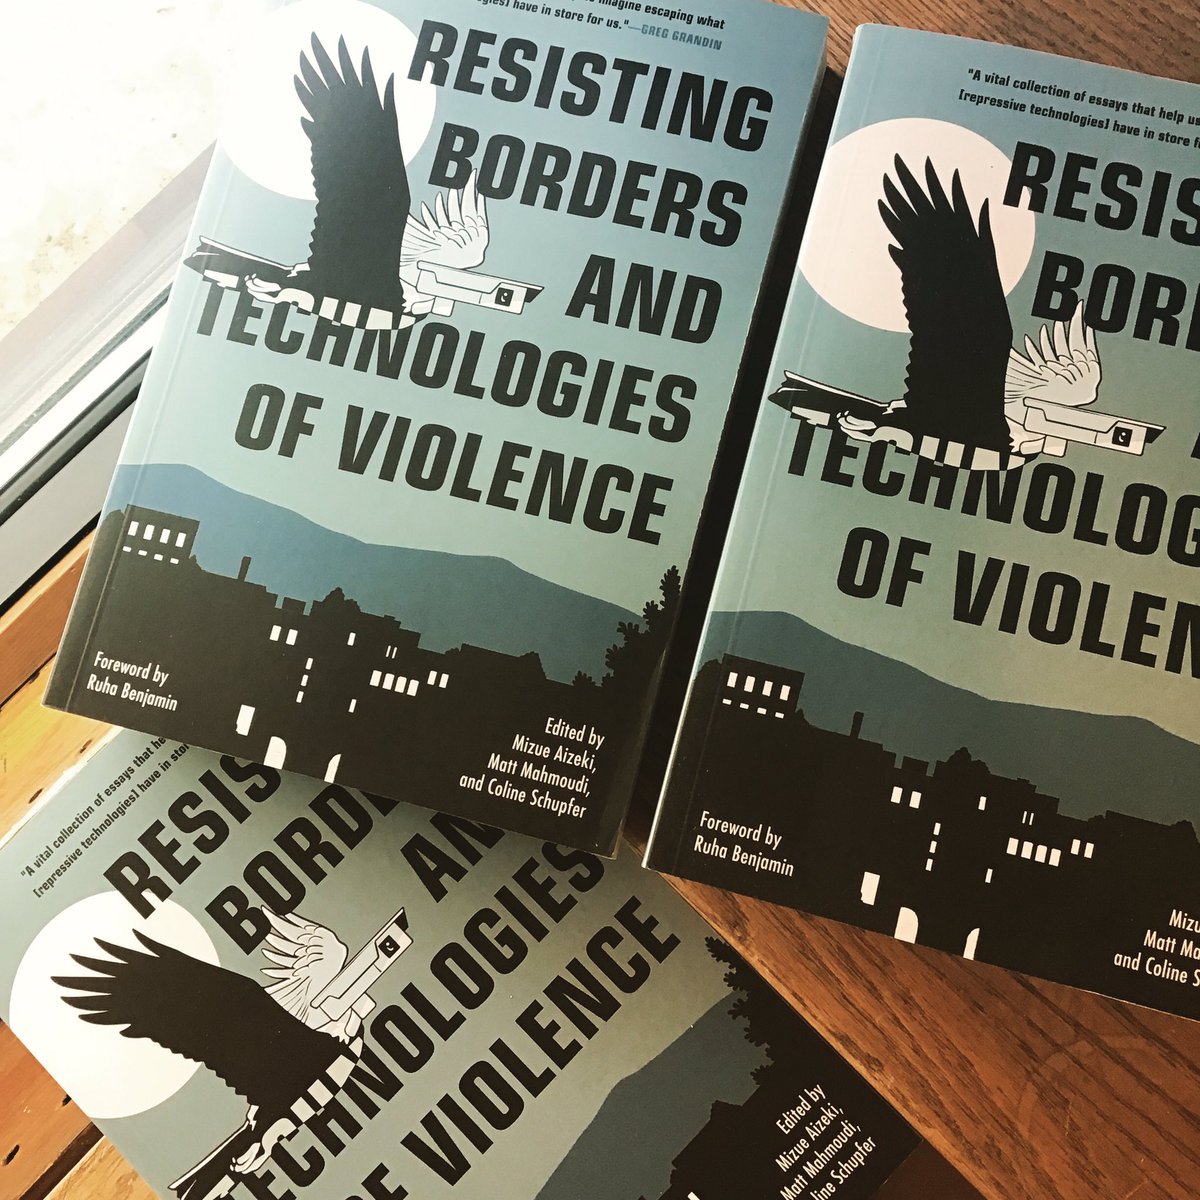 There are more options than the plans being pushed by Biden & Trump. “Resisting Borders & Technologies of Violence charts a new path forward, helping us to imagine a world without borders.” burningbooks.com/products/resis…